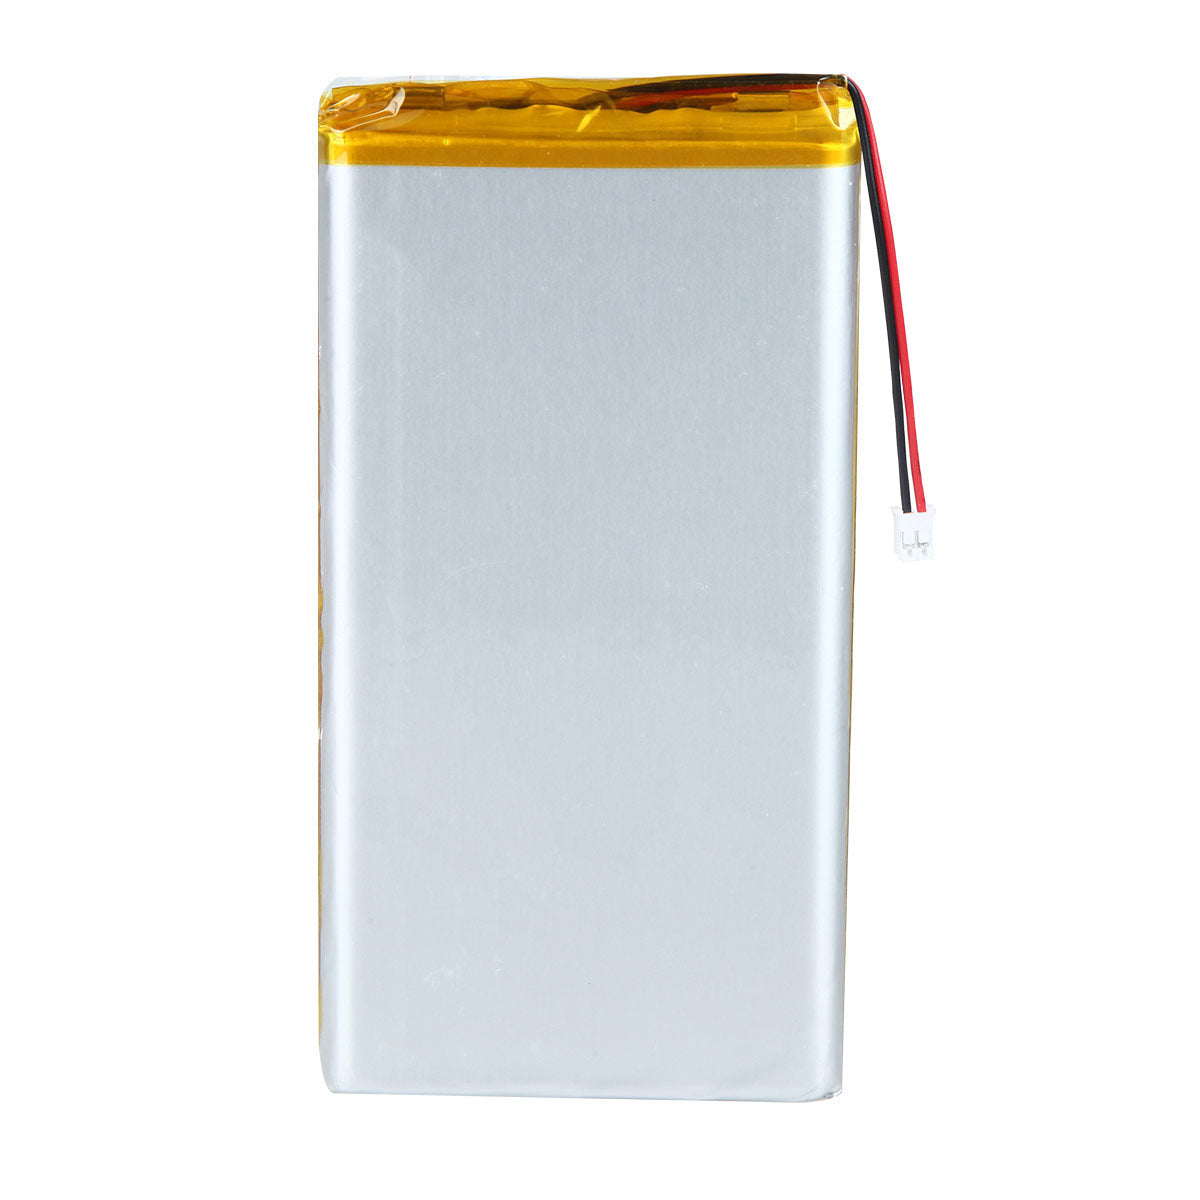 3.7V 11000mAh 1063140 Rechargeable Lithium Polymer Battery